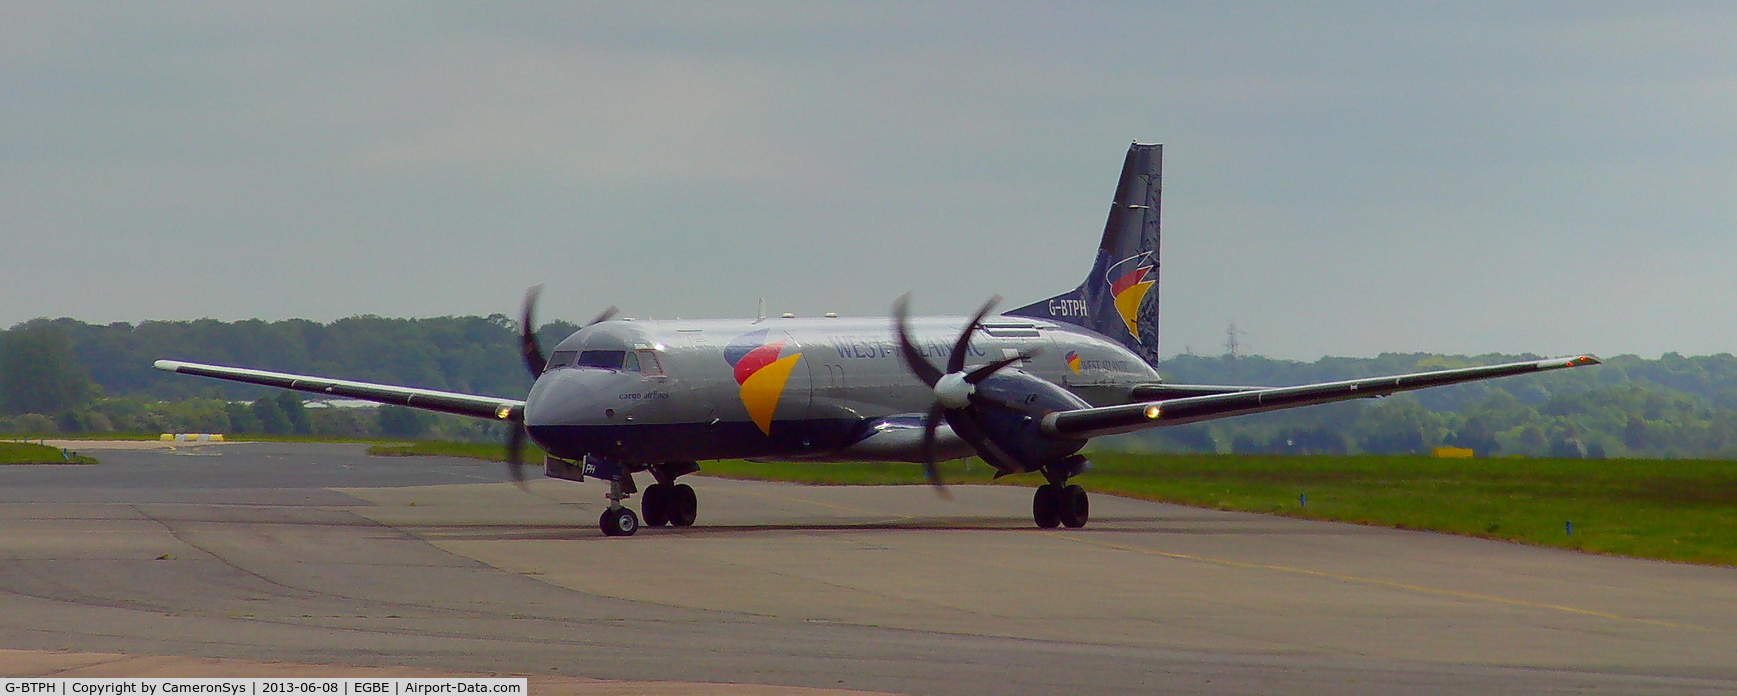 G-BTPH, 1989 British Aerospace ATP(F) C/N 2015, A picture taken after its' landing at Coventry operating NPT022B